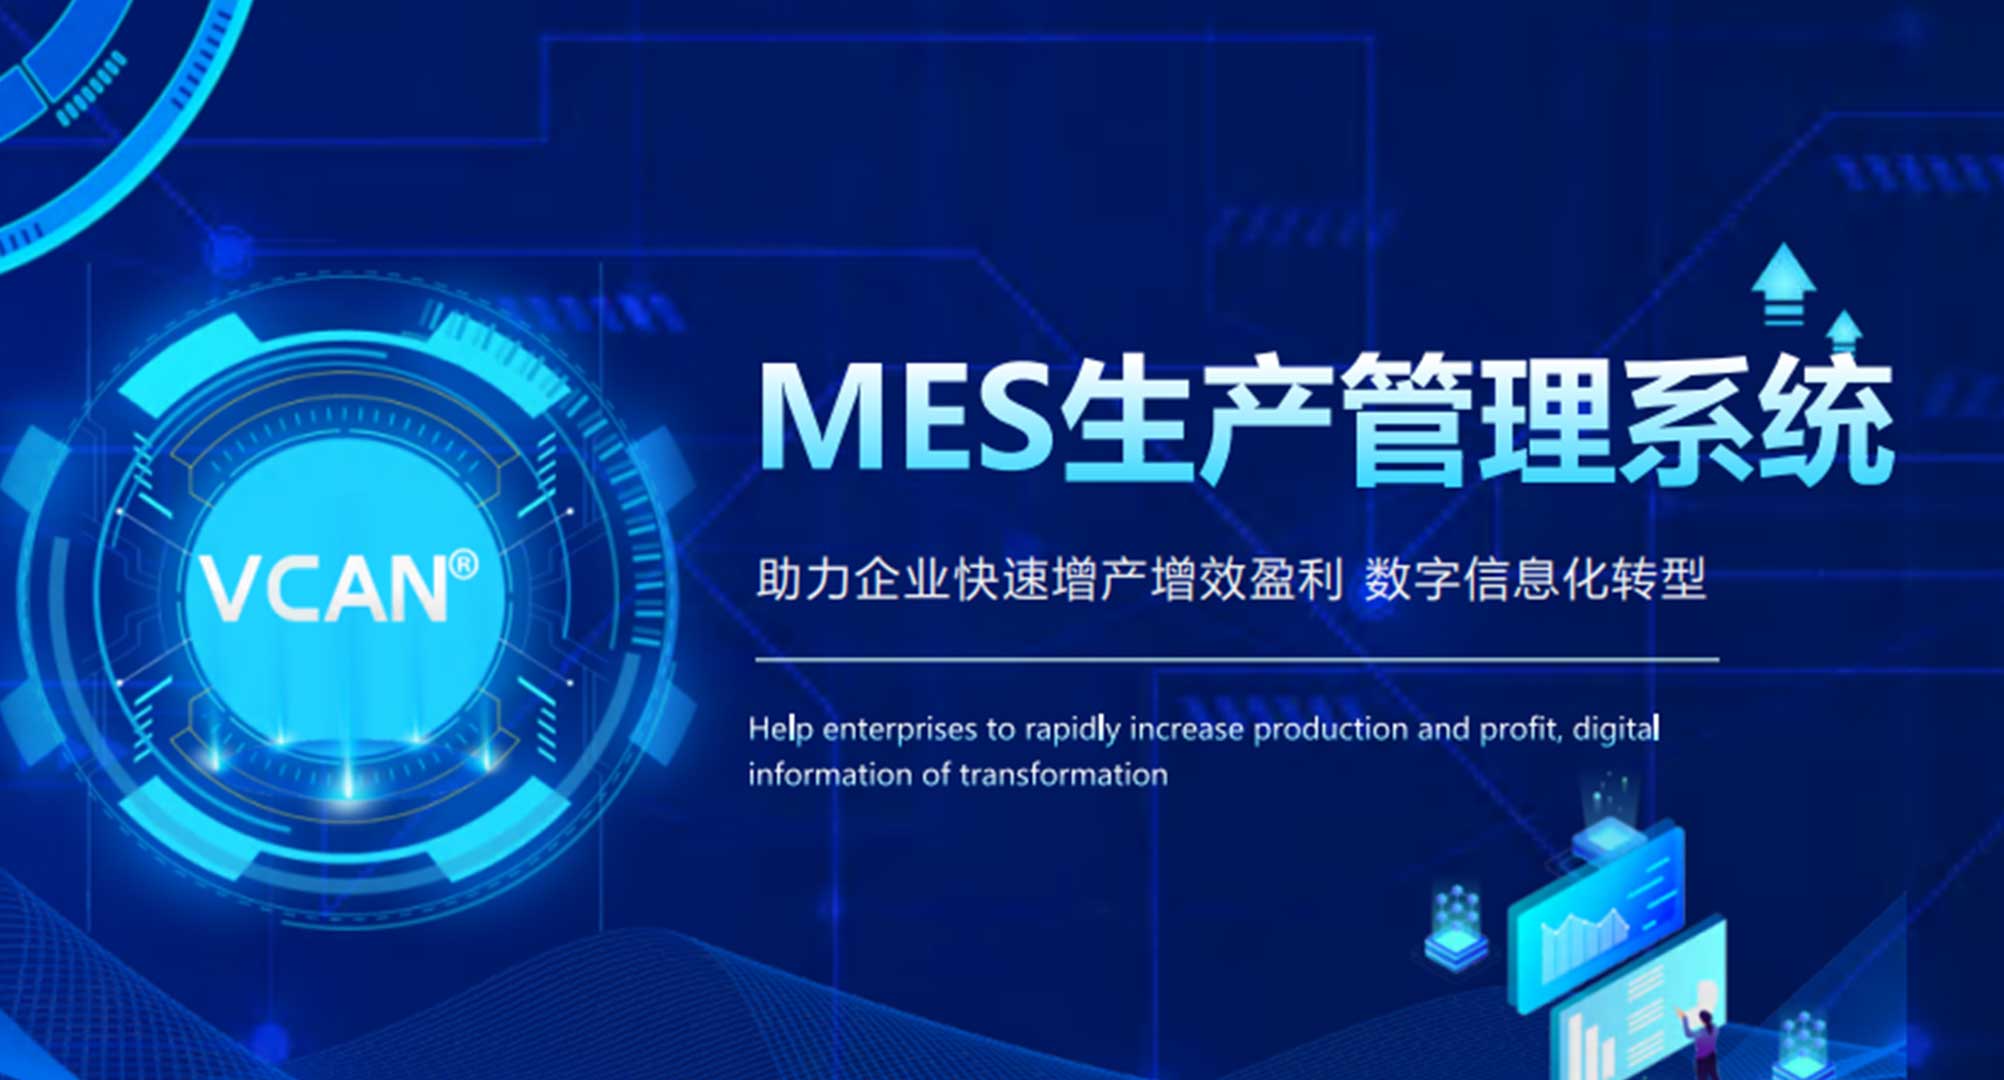 The 12th "Shenzhen Enterprise Innovation Record" Press Conference